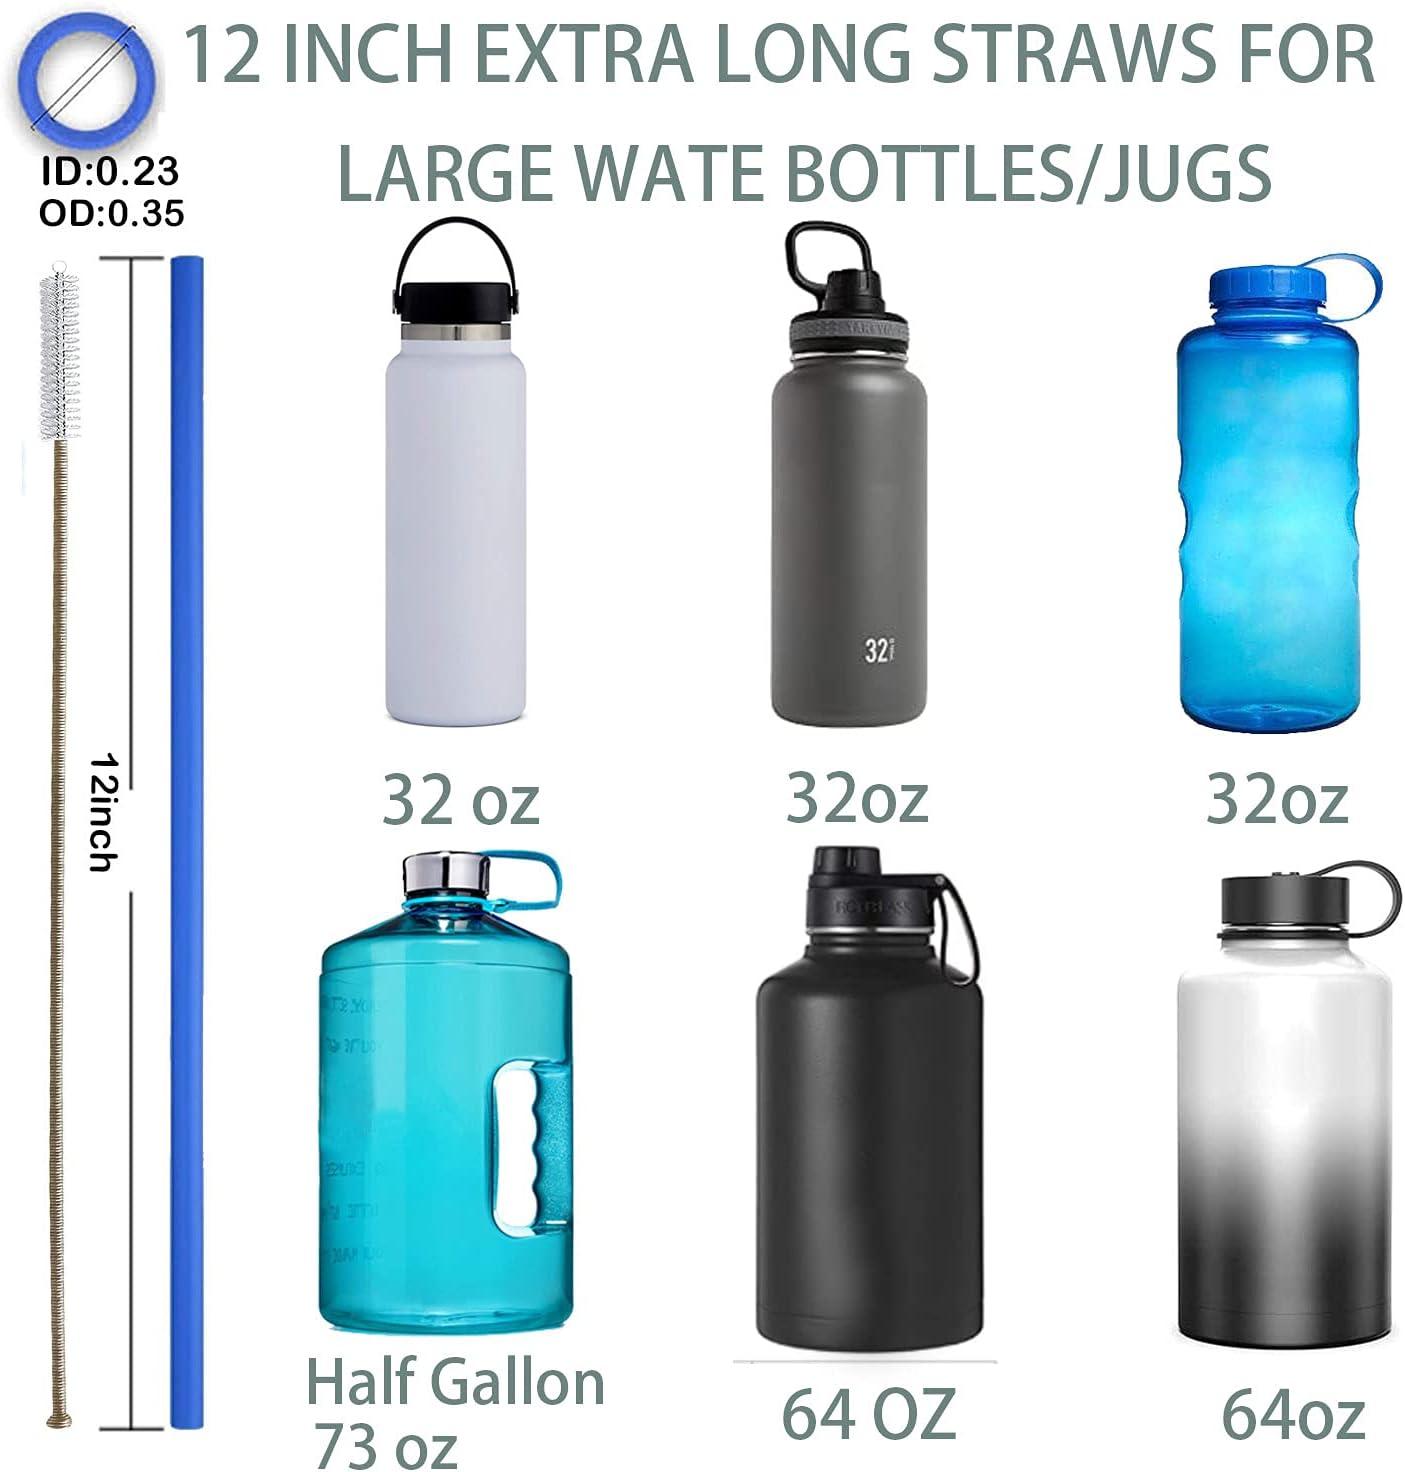 Hiware 12 Inch Extra Long Silicone Straws for Big Tumblers - 40 oz Hydro  Flask/Half Gallon Water Bottle Jug/30 oz YETI/RICT/OZARK TRAIL - Flexible  Straws for Extra Tall Cups and Giant Mugs 